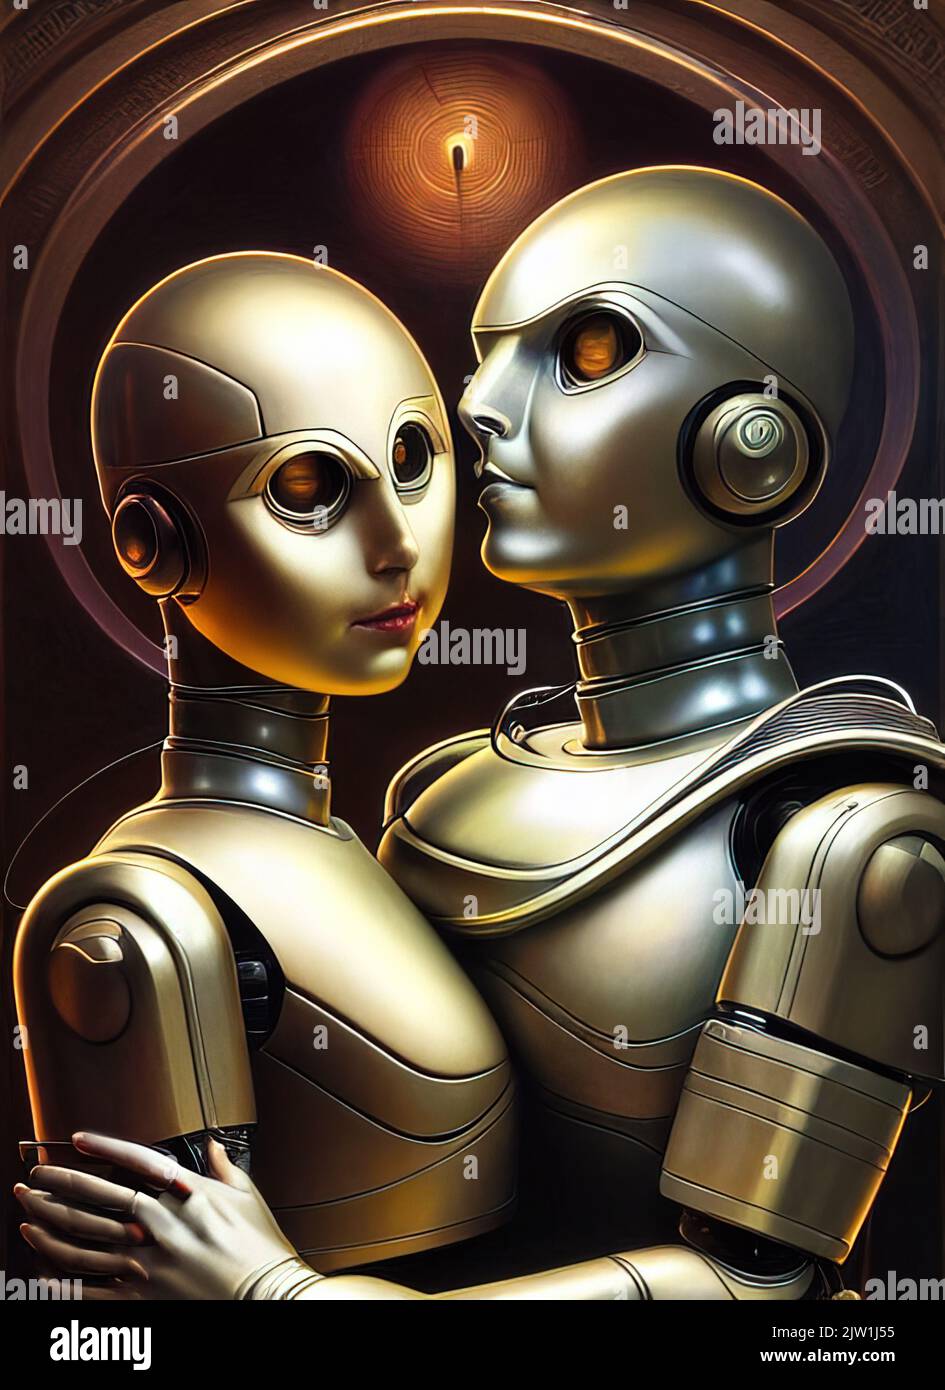 Humanoid androids robots couple embrace each other Stock Photo